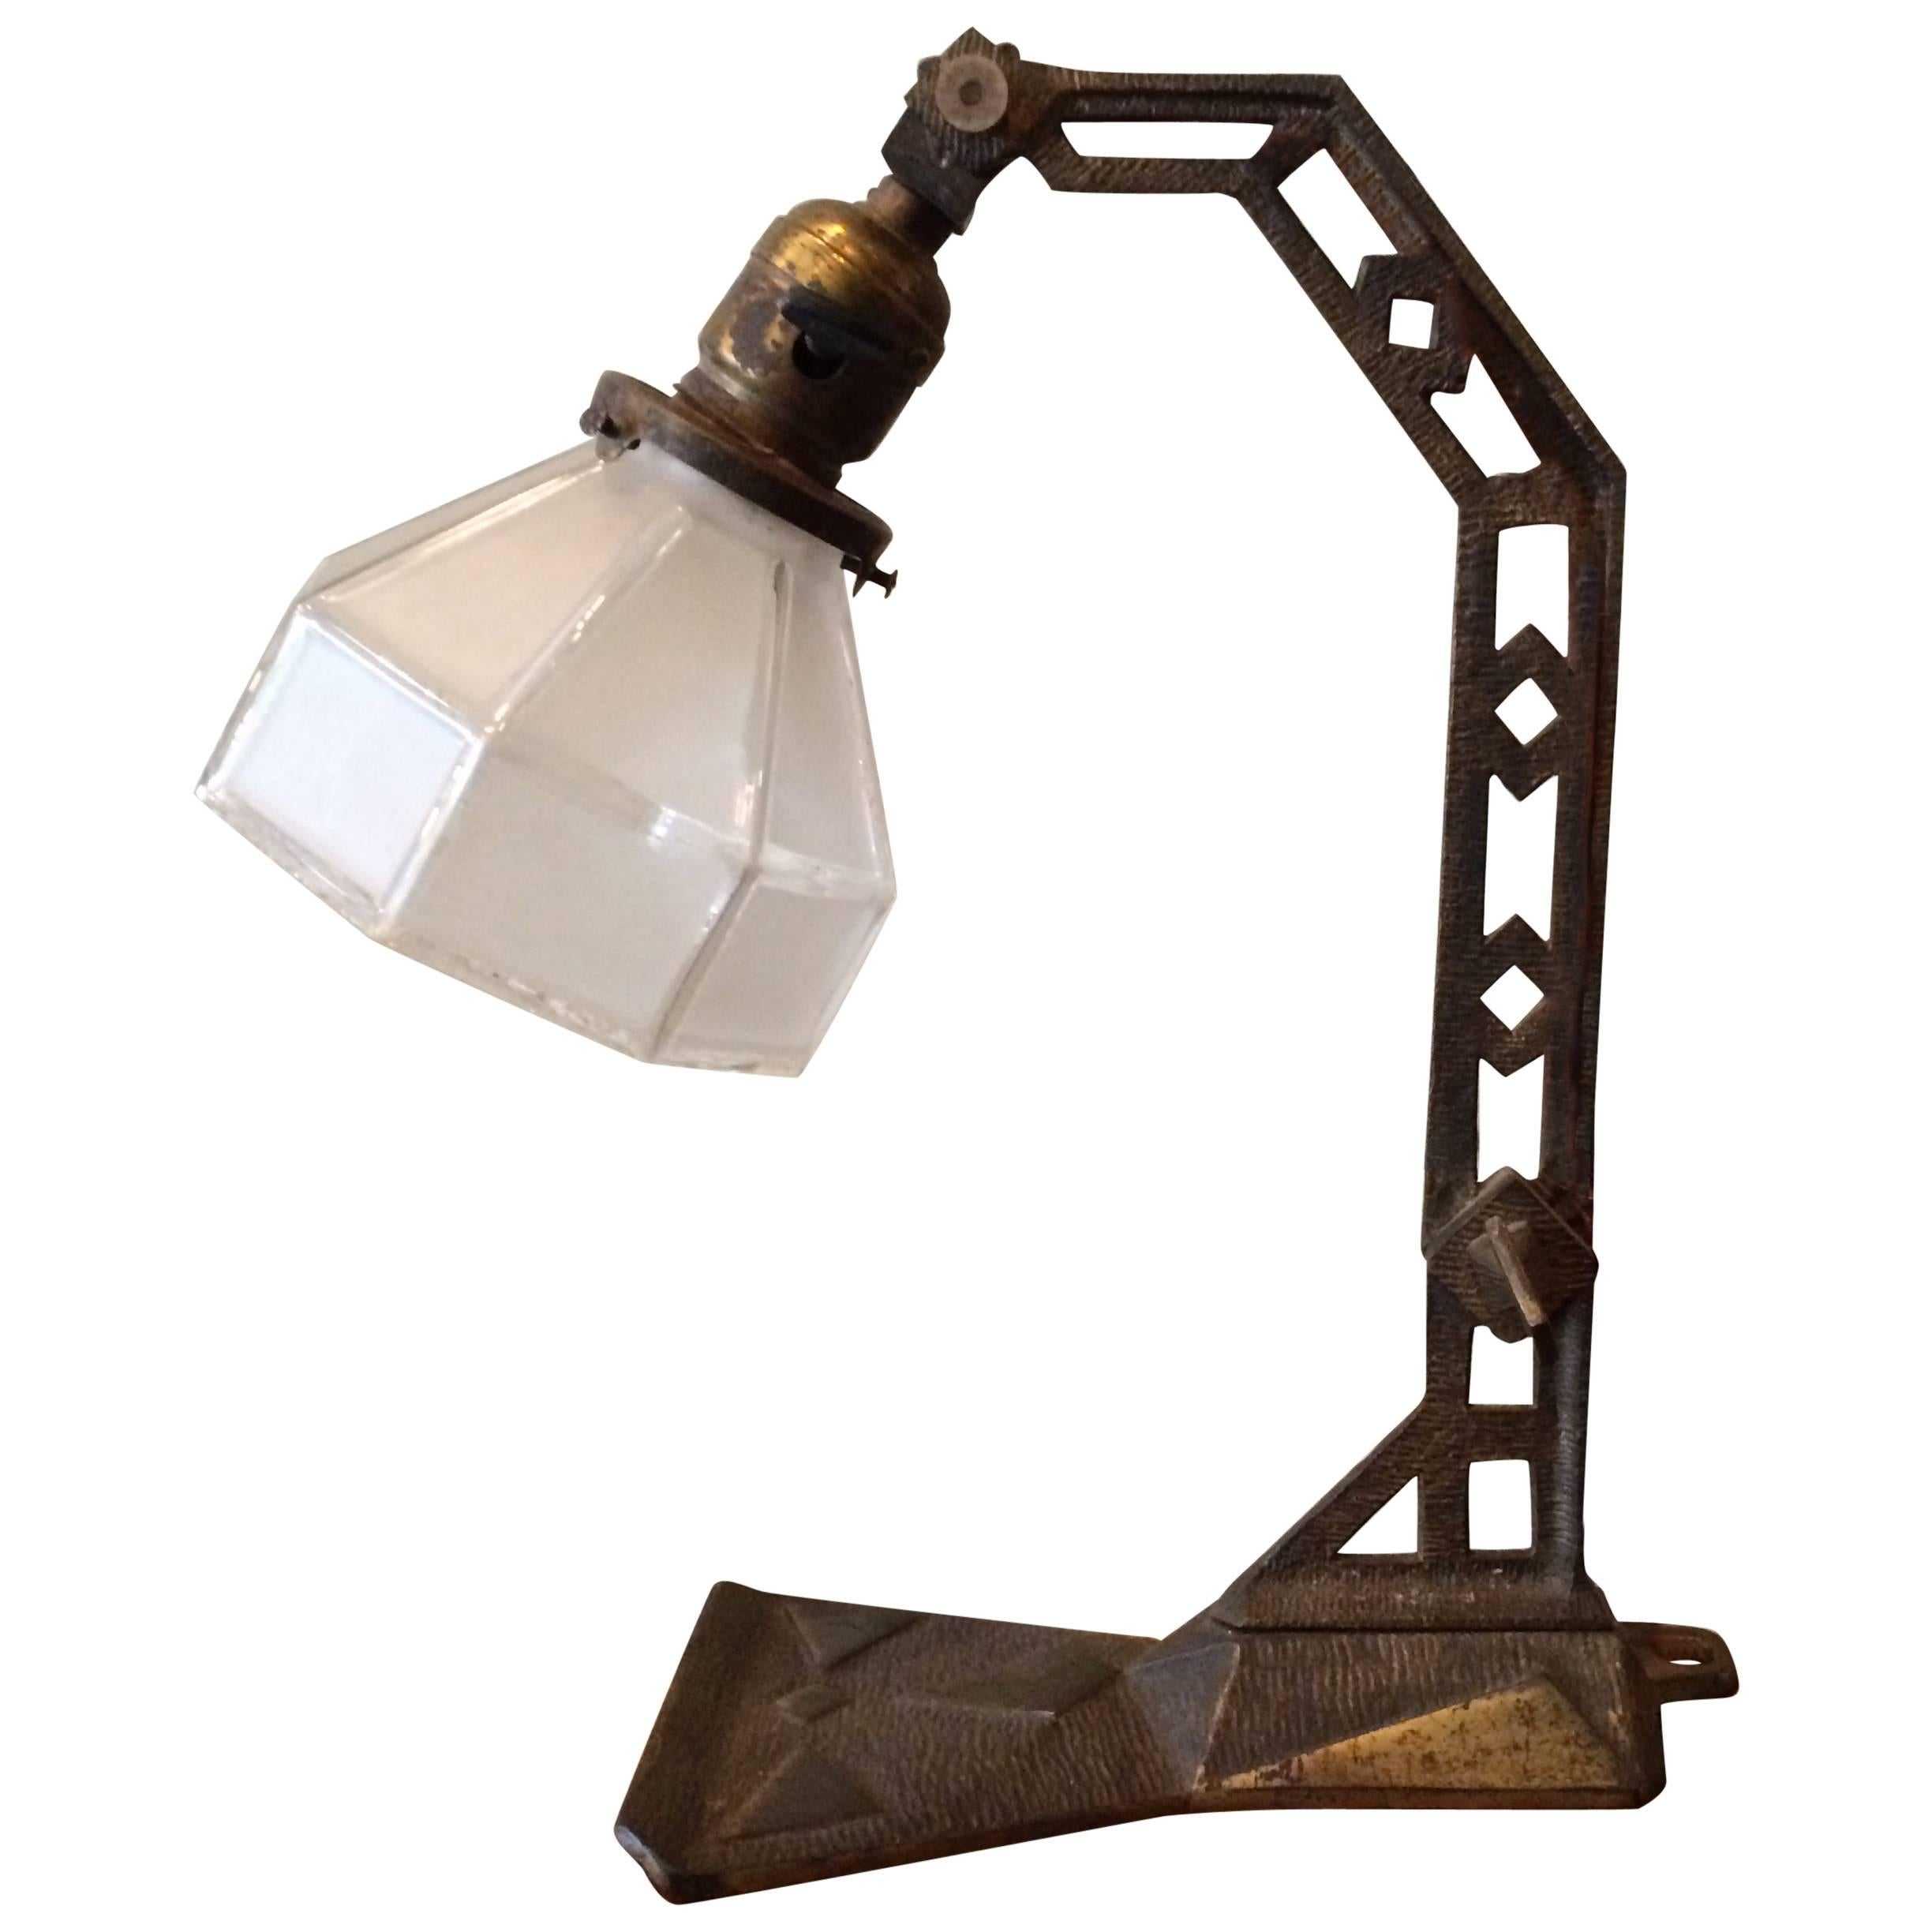 Arts & Crafts Cast Iron Table Lamp with Frosted Glass Shade